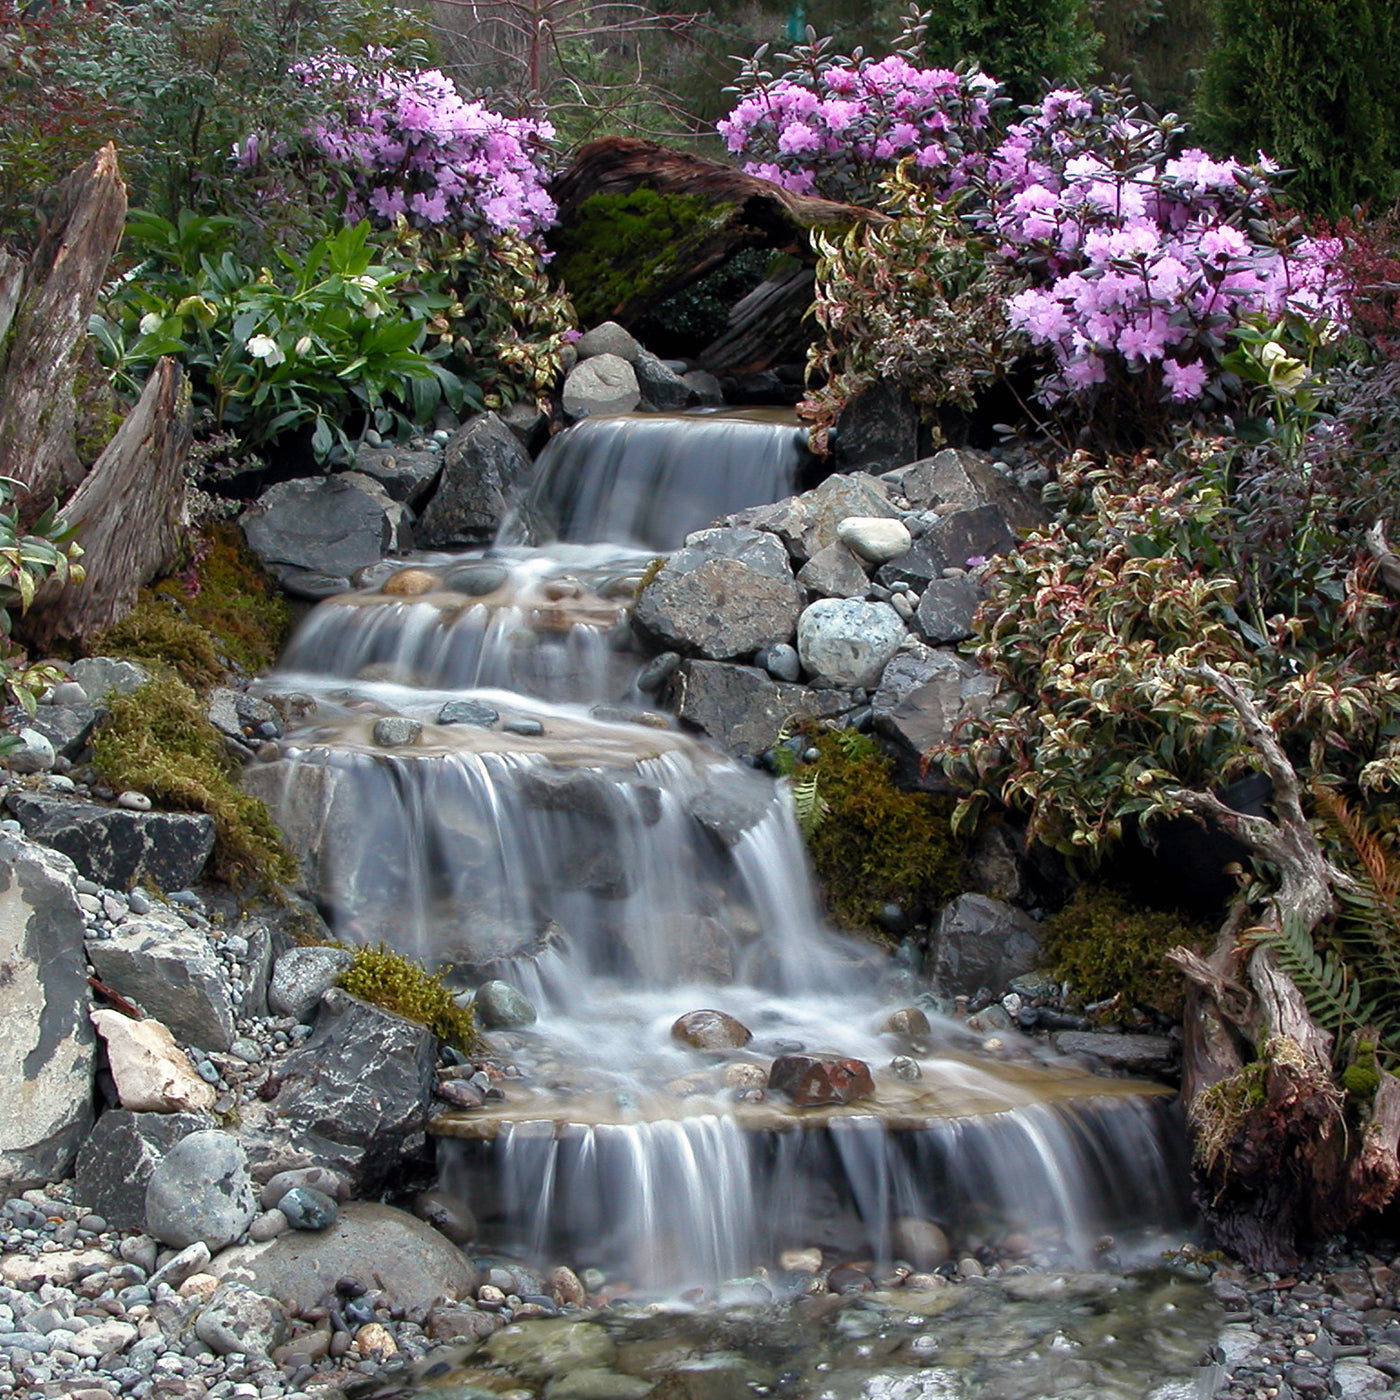 The Original Pondless Waterfall that started it all - a four tiered waterfall cascading down with pink bloom plants on the side